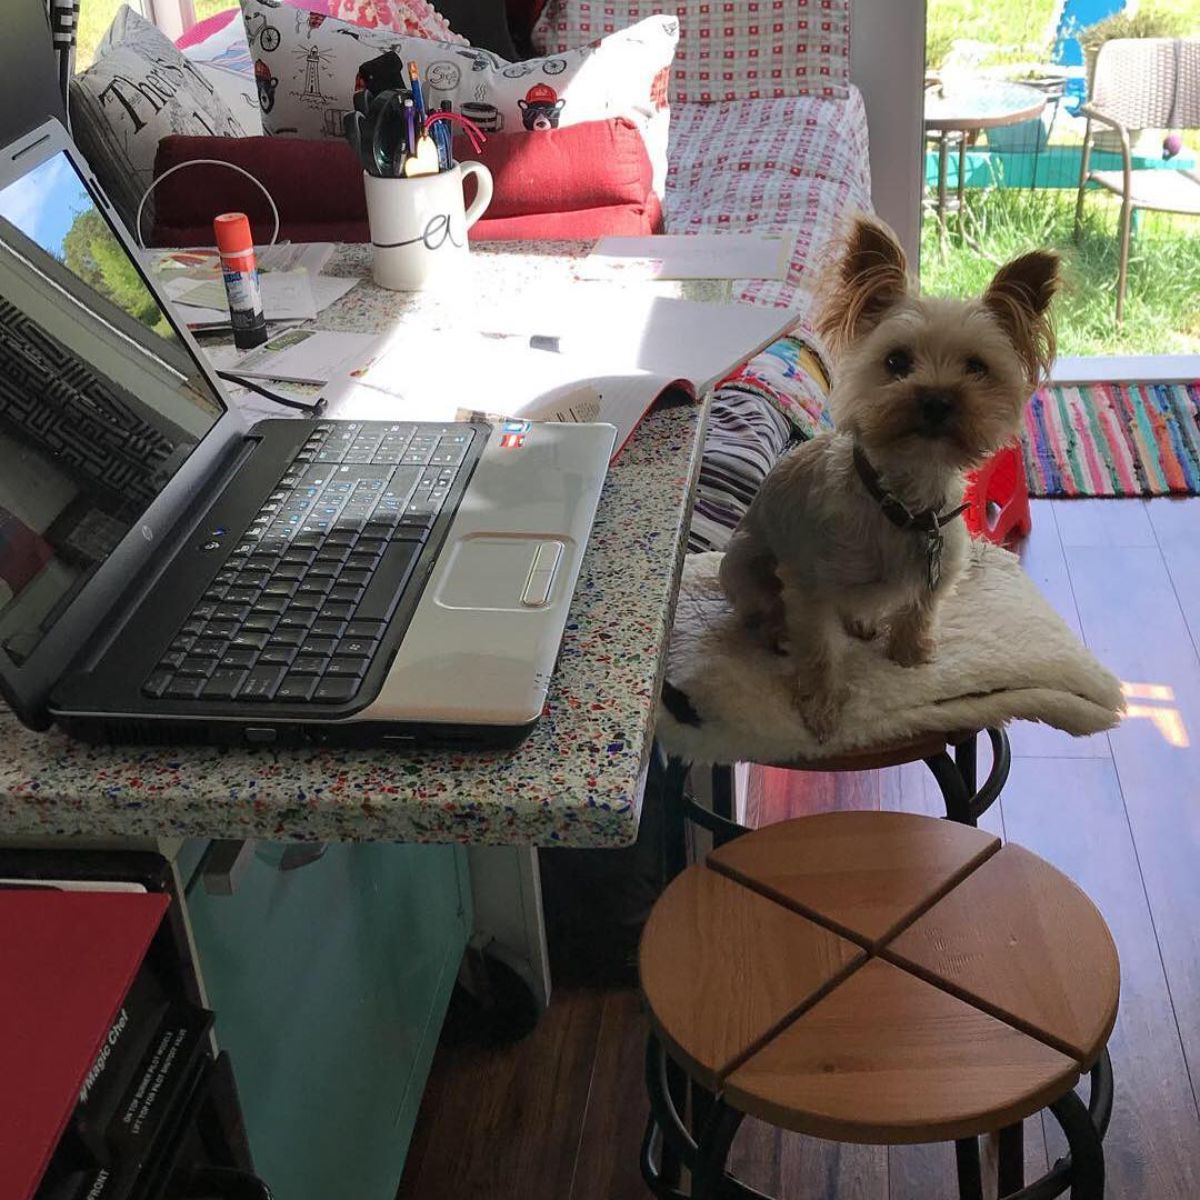 dog on seat by laptop open on workspace